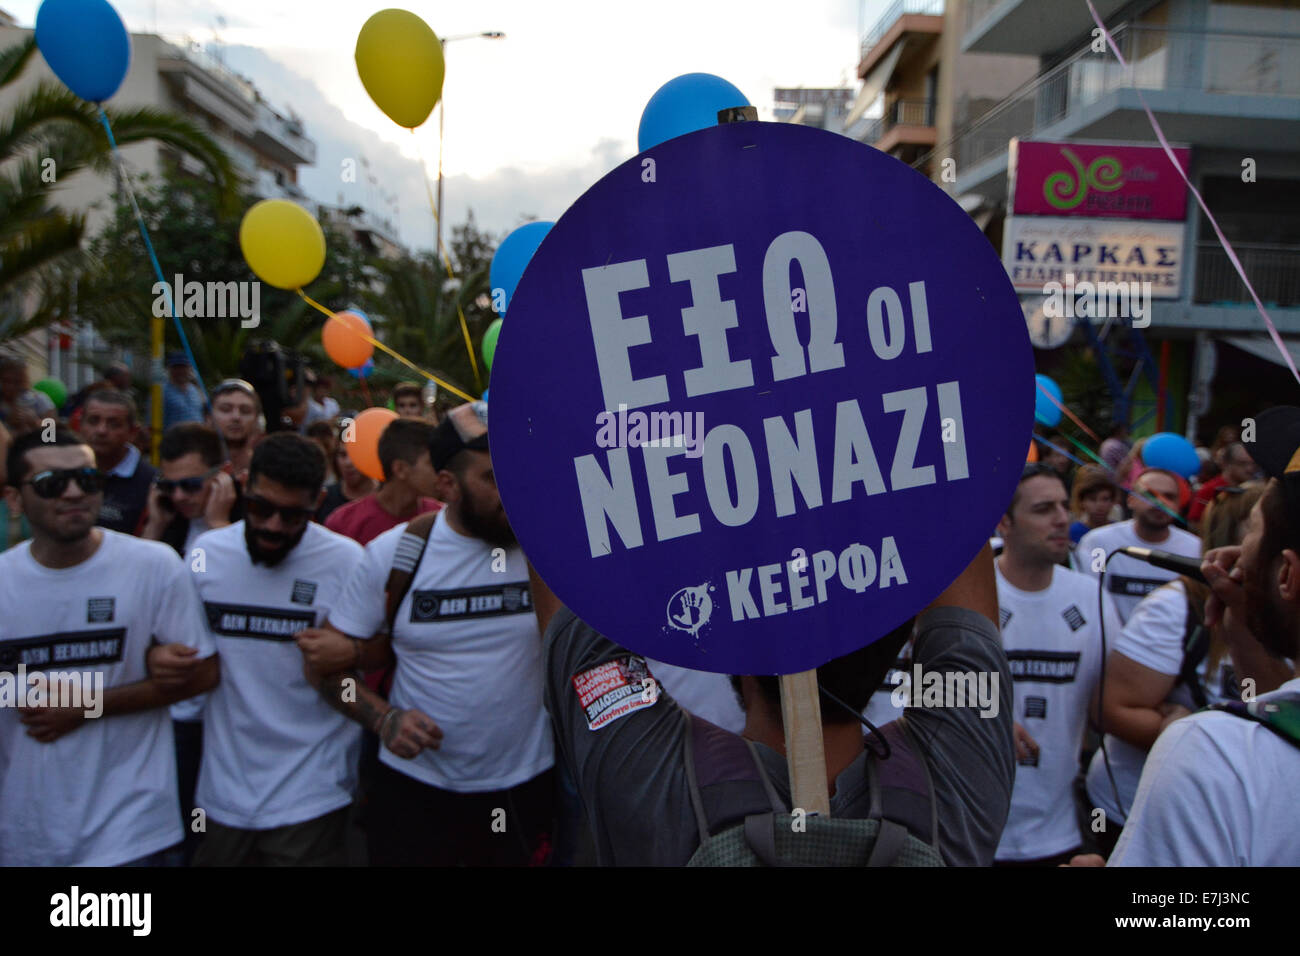 Athens, Greece. 18th September, 2014. Protesters shout slogans against fascism as they rally to commemorate one year after rapper Pavlos Fyssas was stabbed to death by a member of the neonazi, Golden Dawn party. Athens, Greece, September 18, 2014.  Credit:  Nikolas Georgiou / Alamy Live News Stock Photo